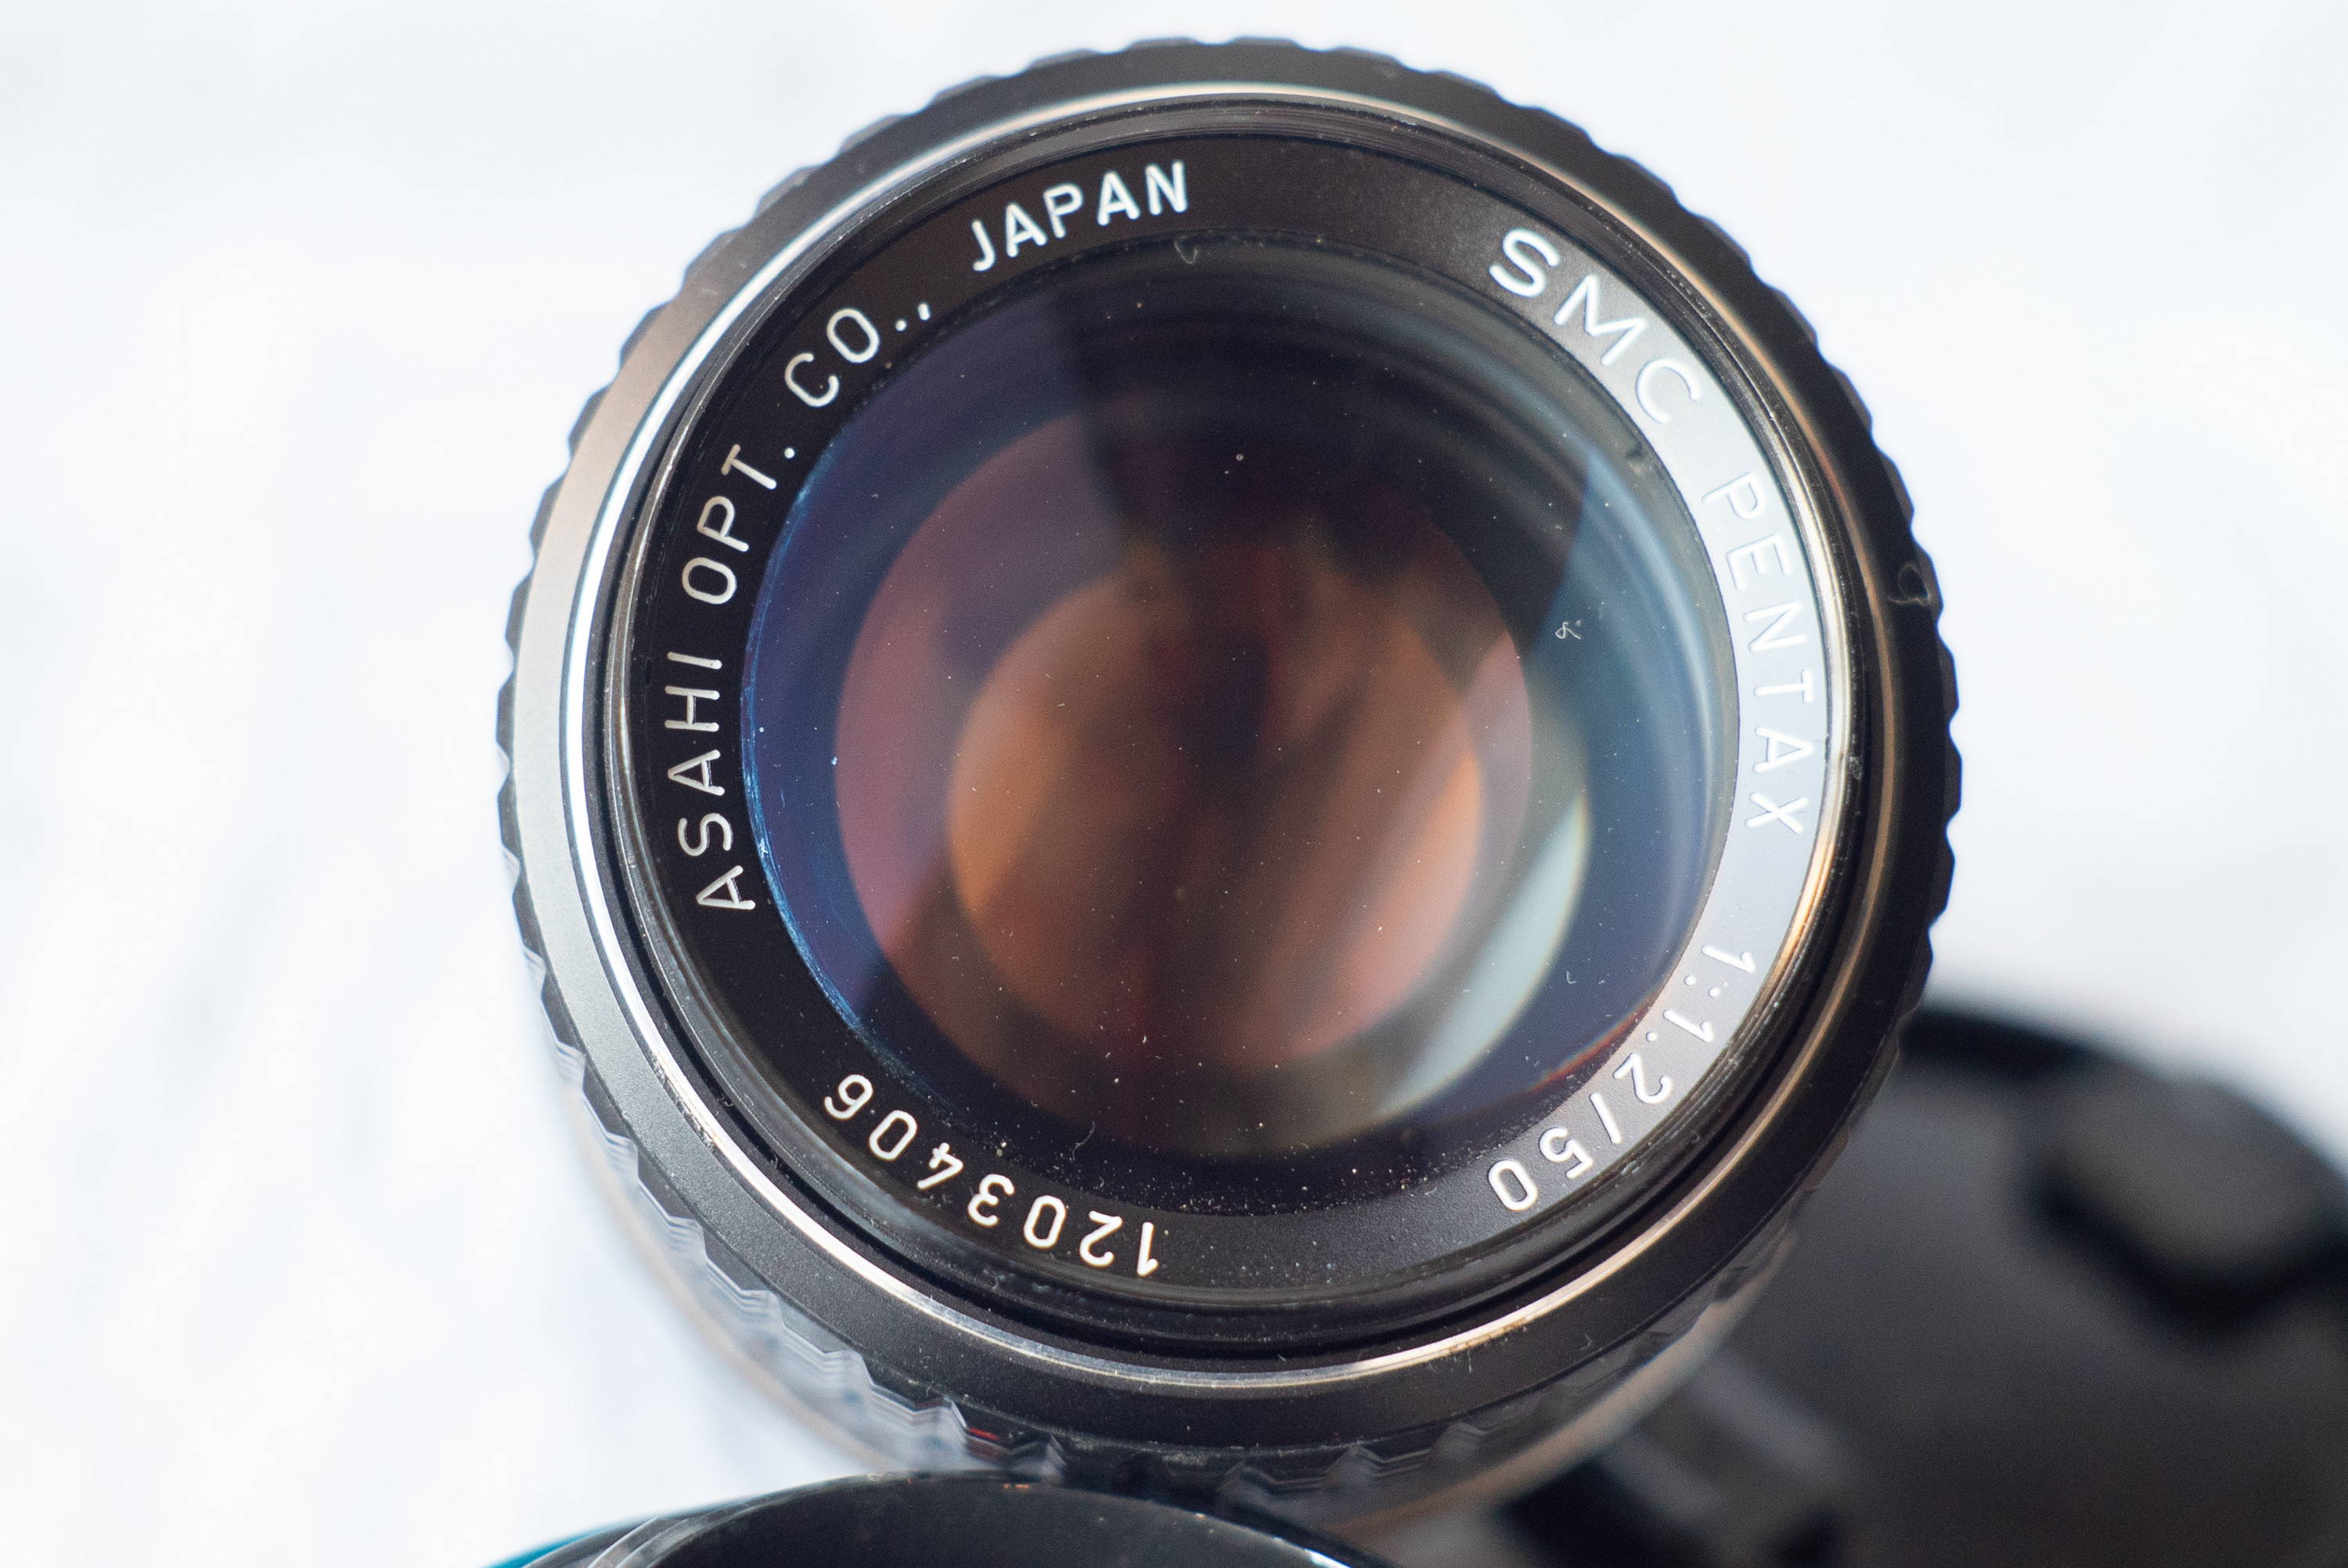 SMC Pentax 1.2 / 50 from the side of the front lens.